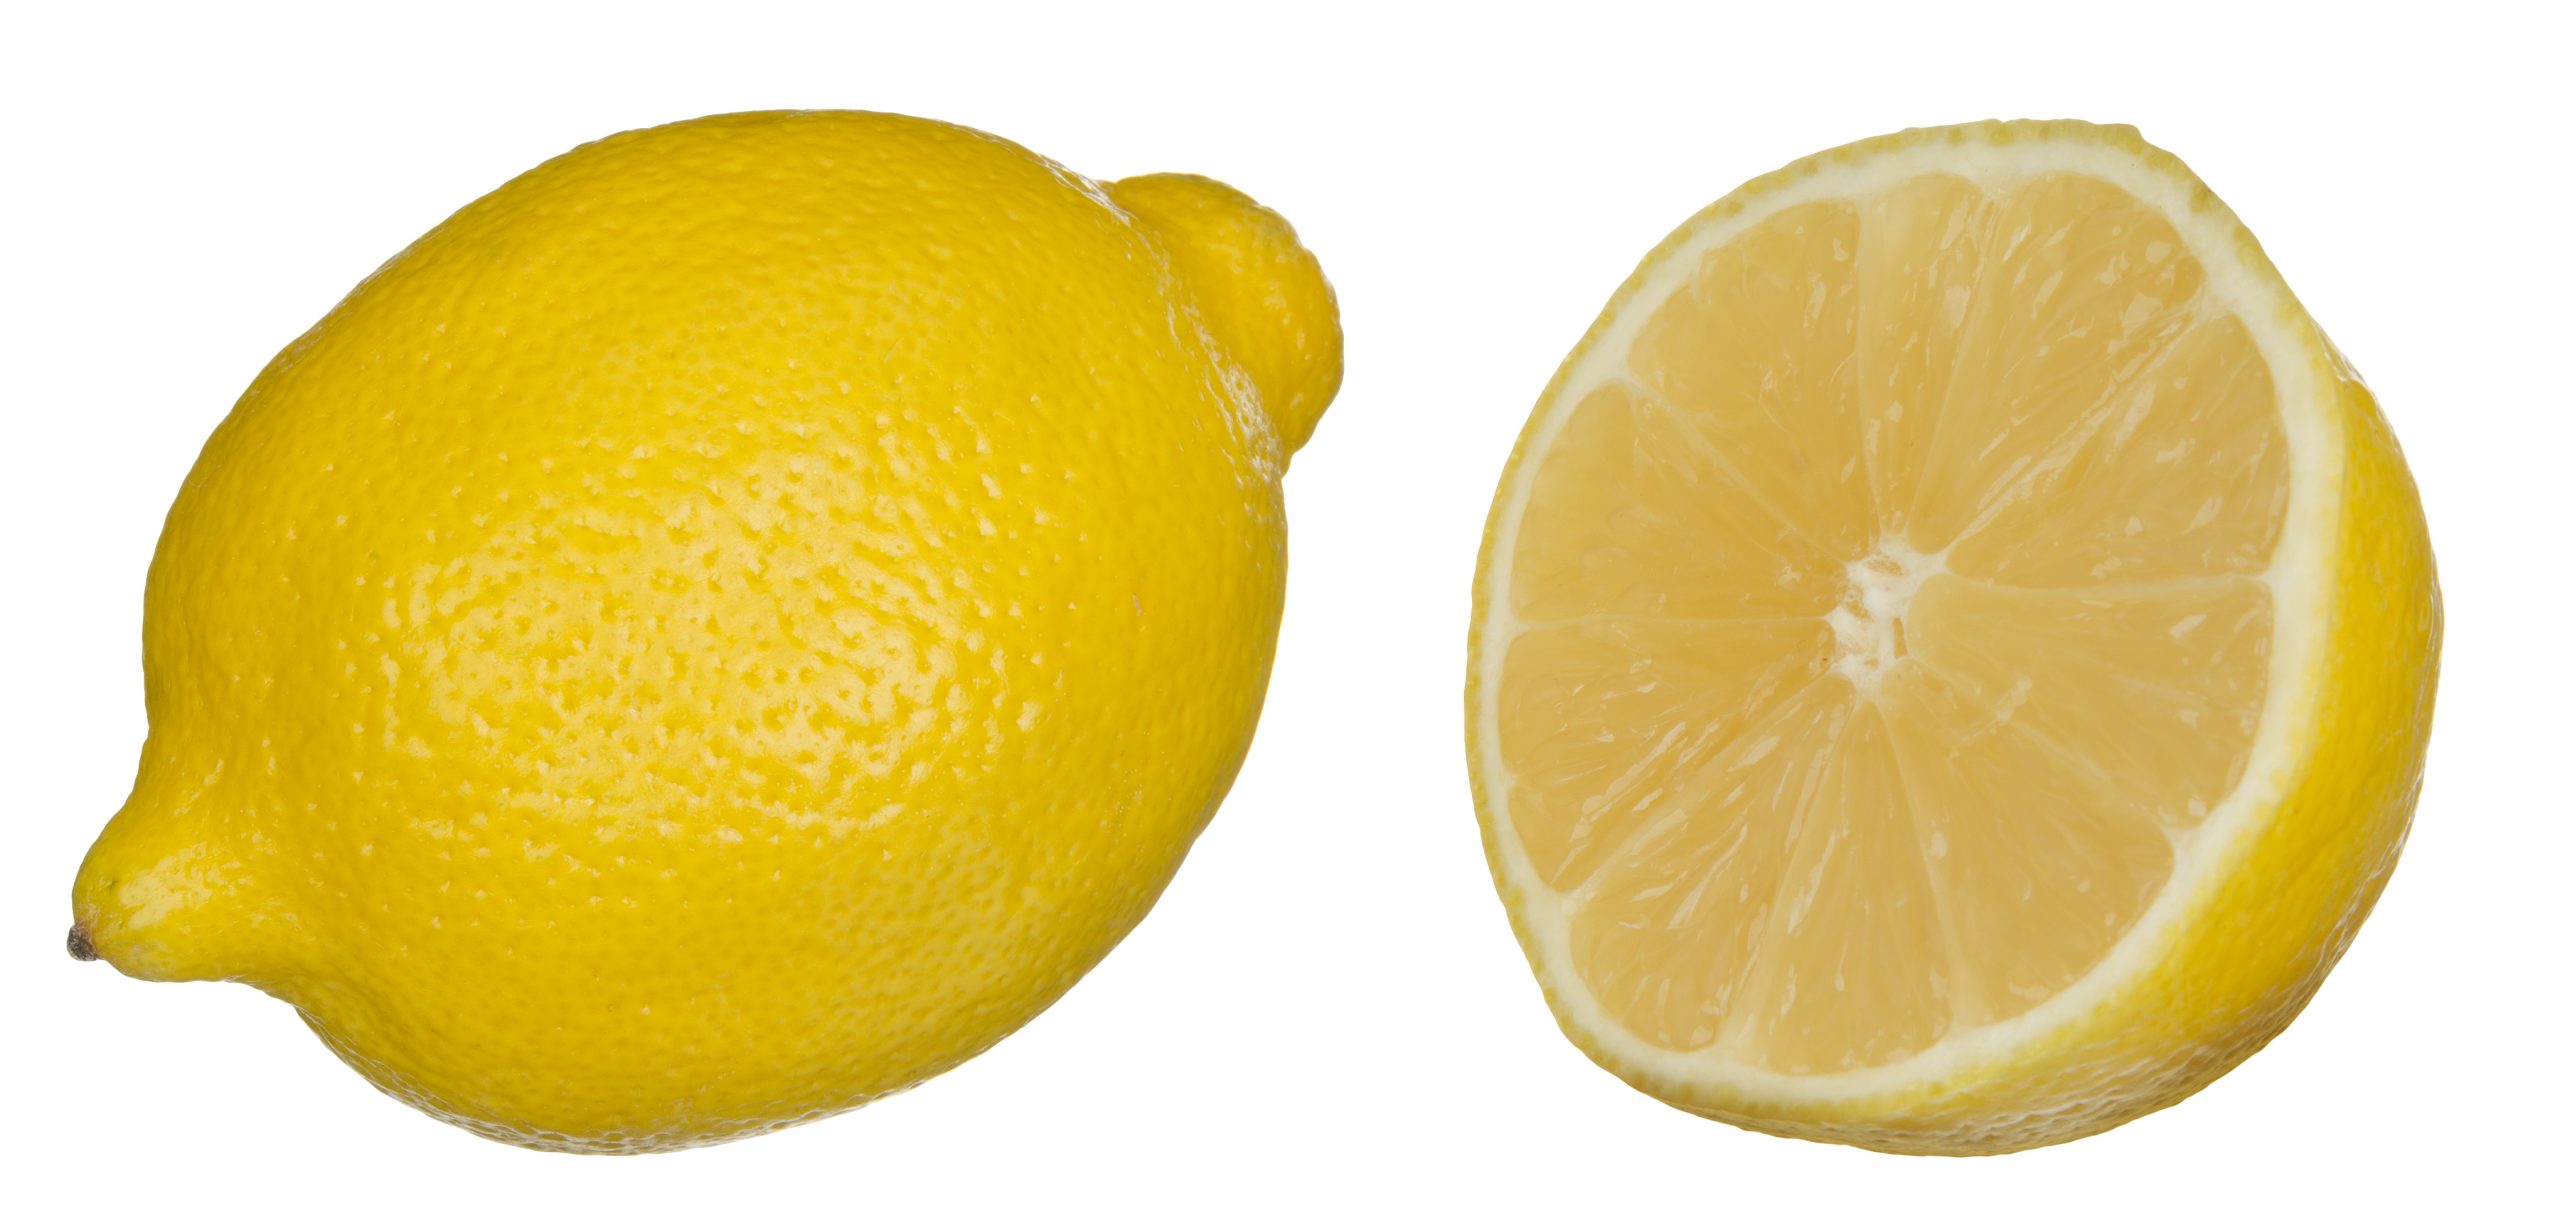 ‘Non-supermarkets’ accounted for a 20% share of lemon sales over the 12 month period.